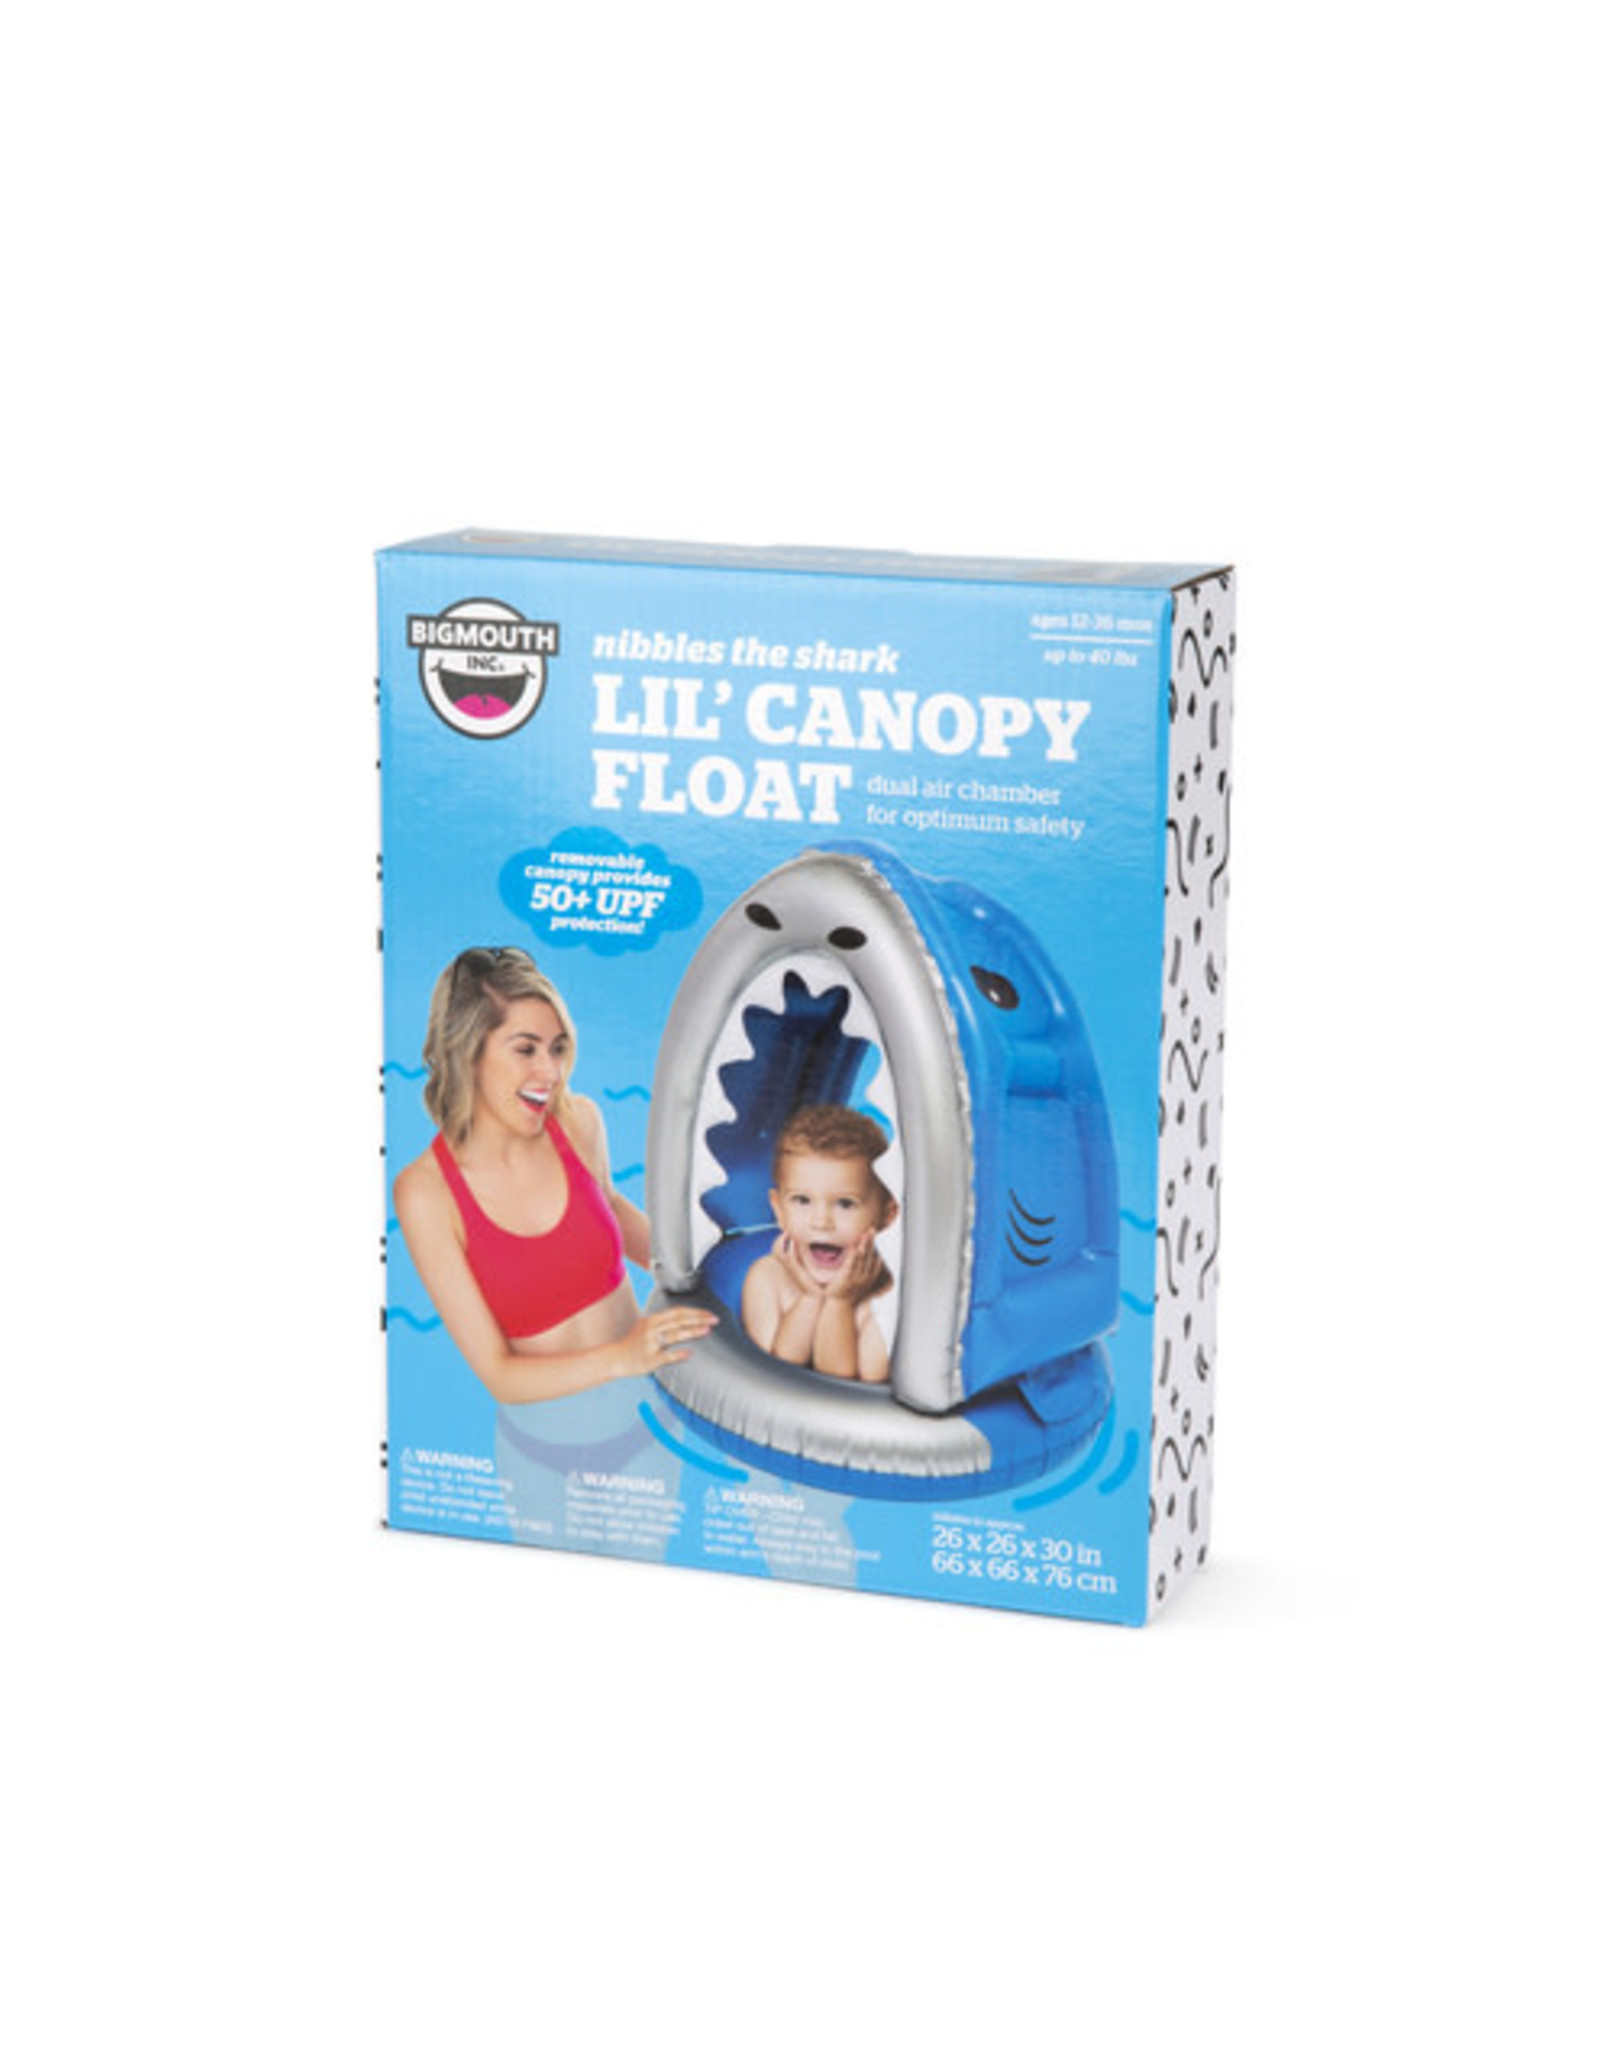 BigMouth Shark with Canopy Lil' Float